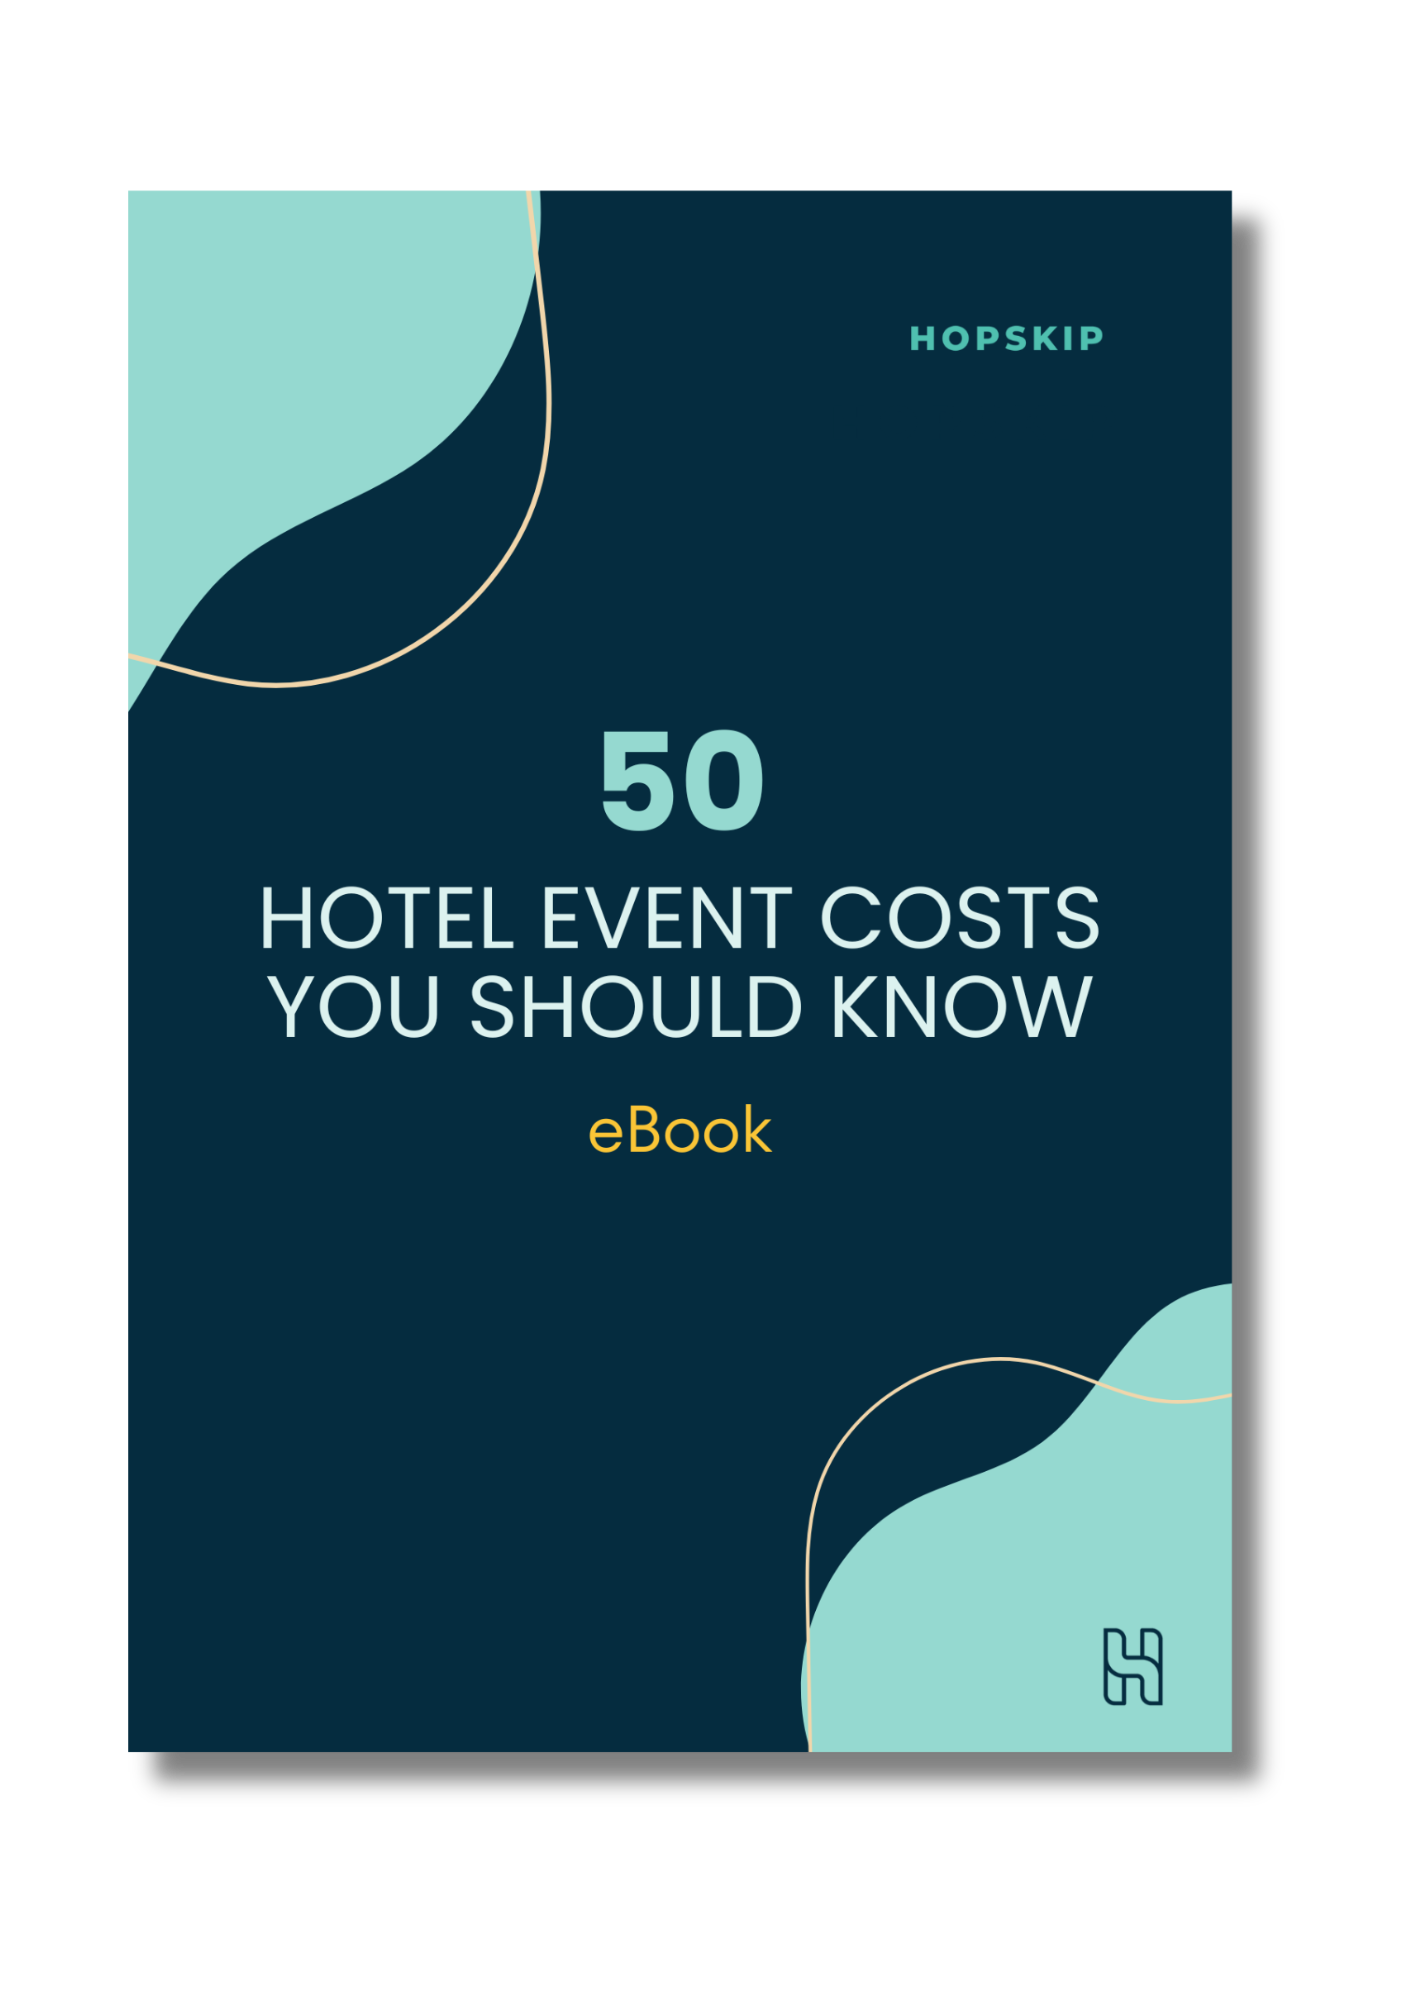 Copy of 50 Hotel Event Costs You Should Know_HopSkip_eBook (1)